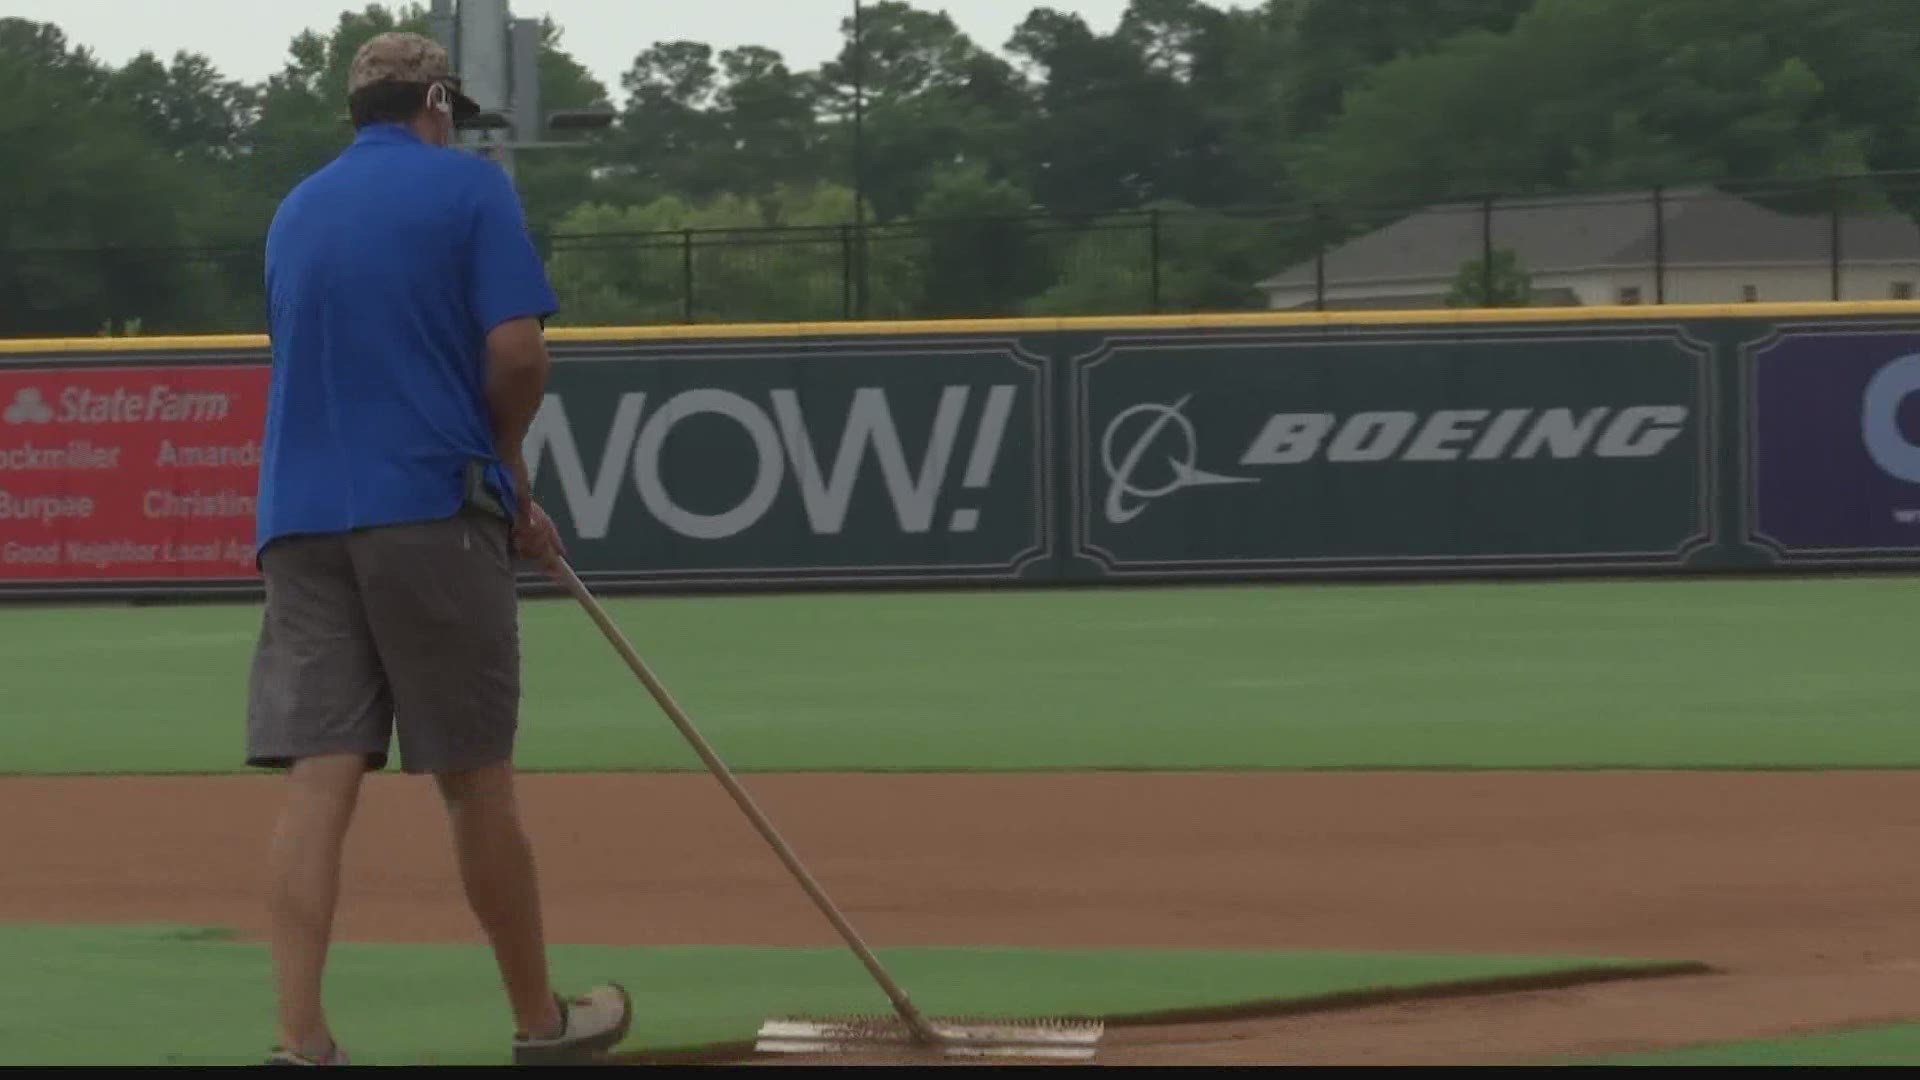 Minor League Baseball may not happen in 2020, but Charlie Weaver and the Trash Pandas grounds crew are still hard at work.